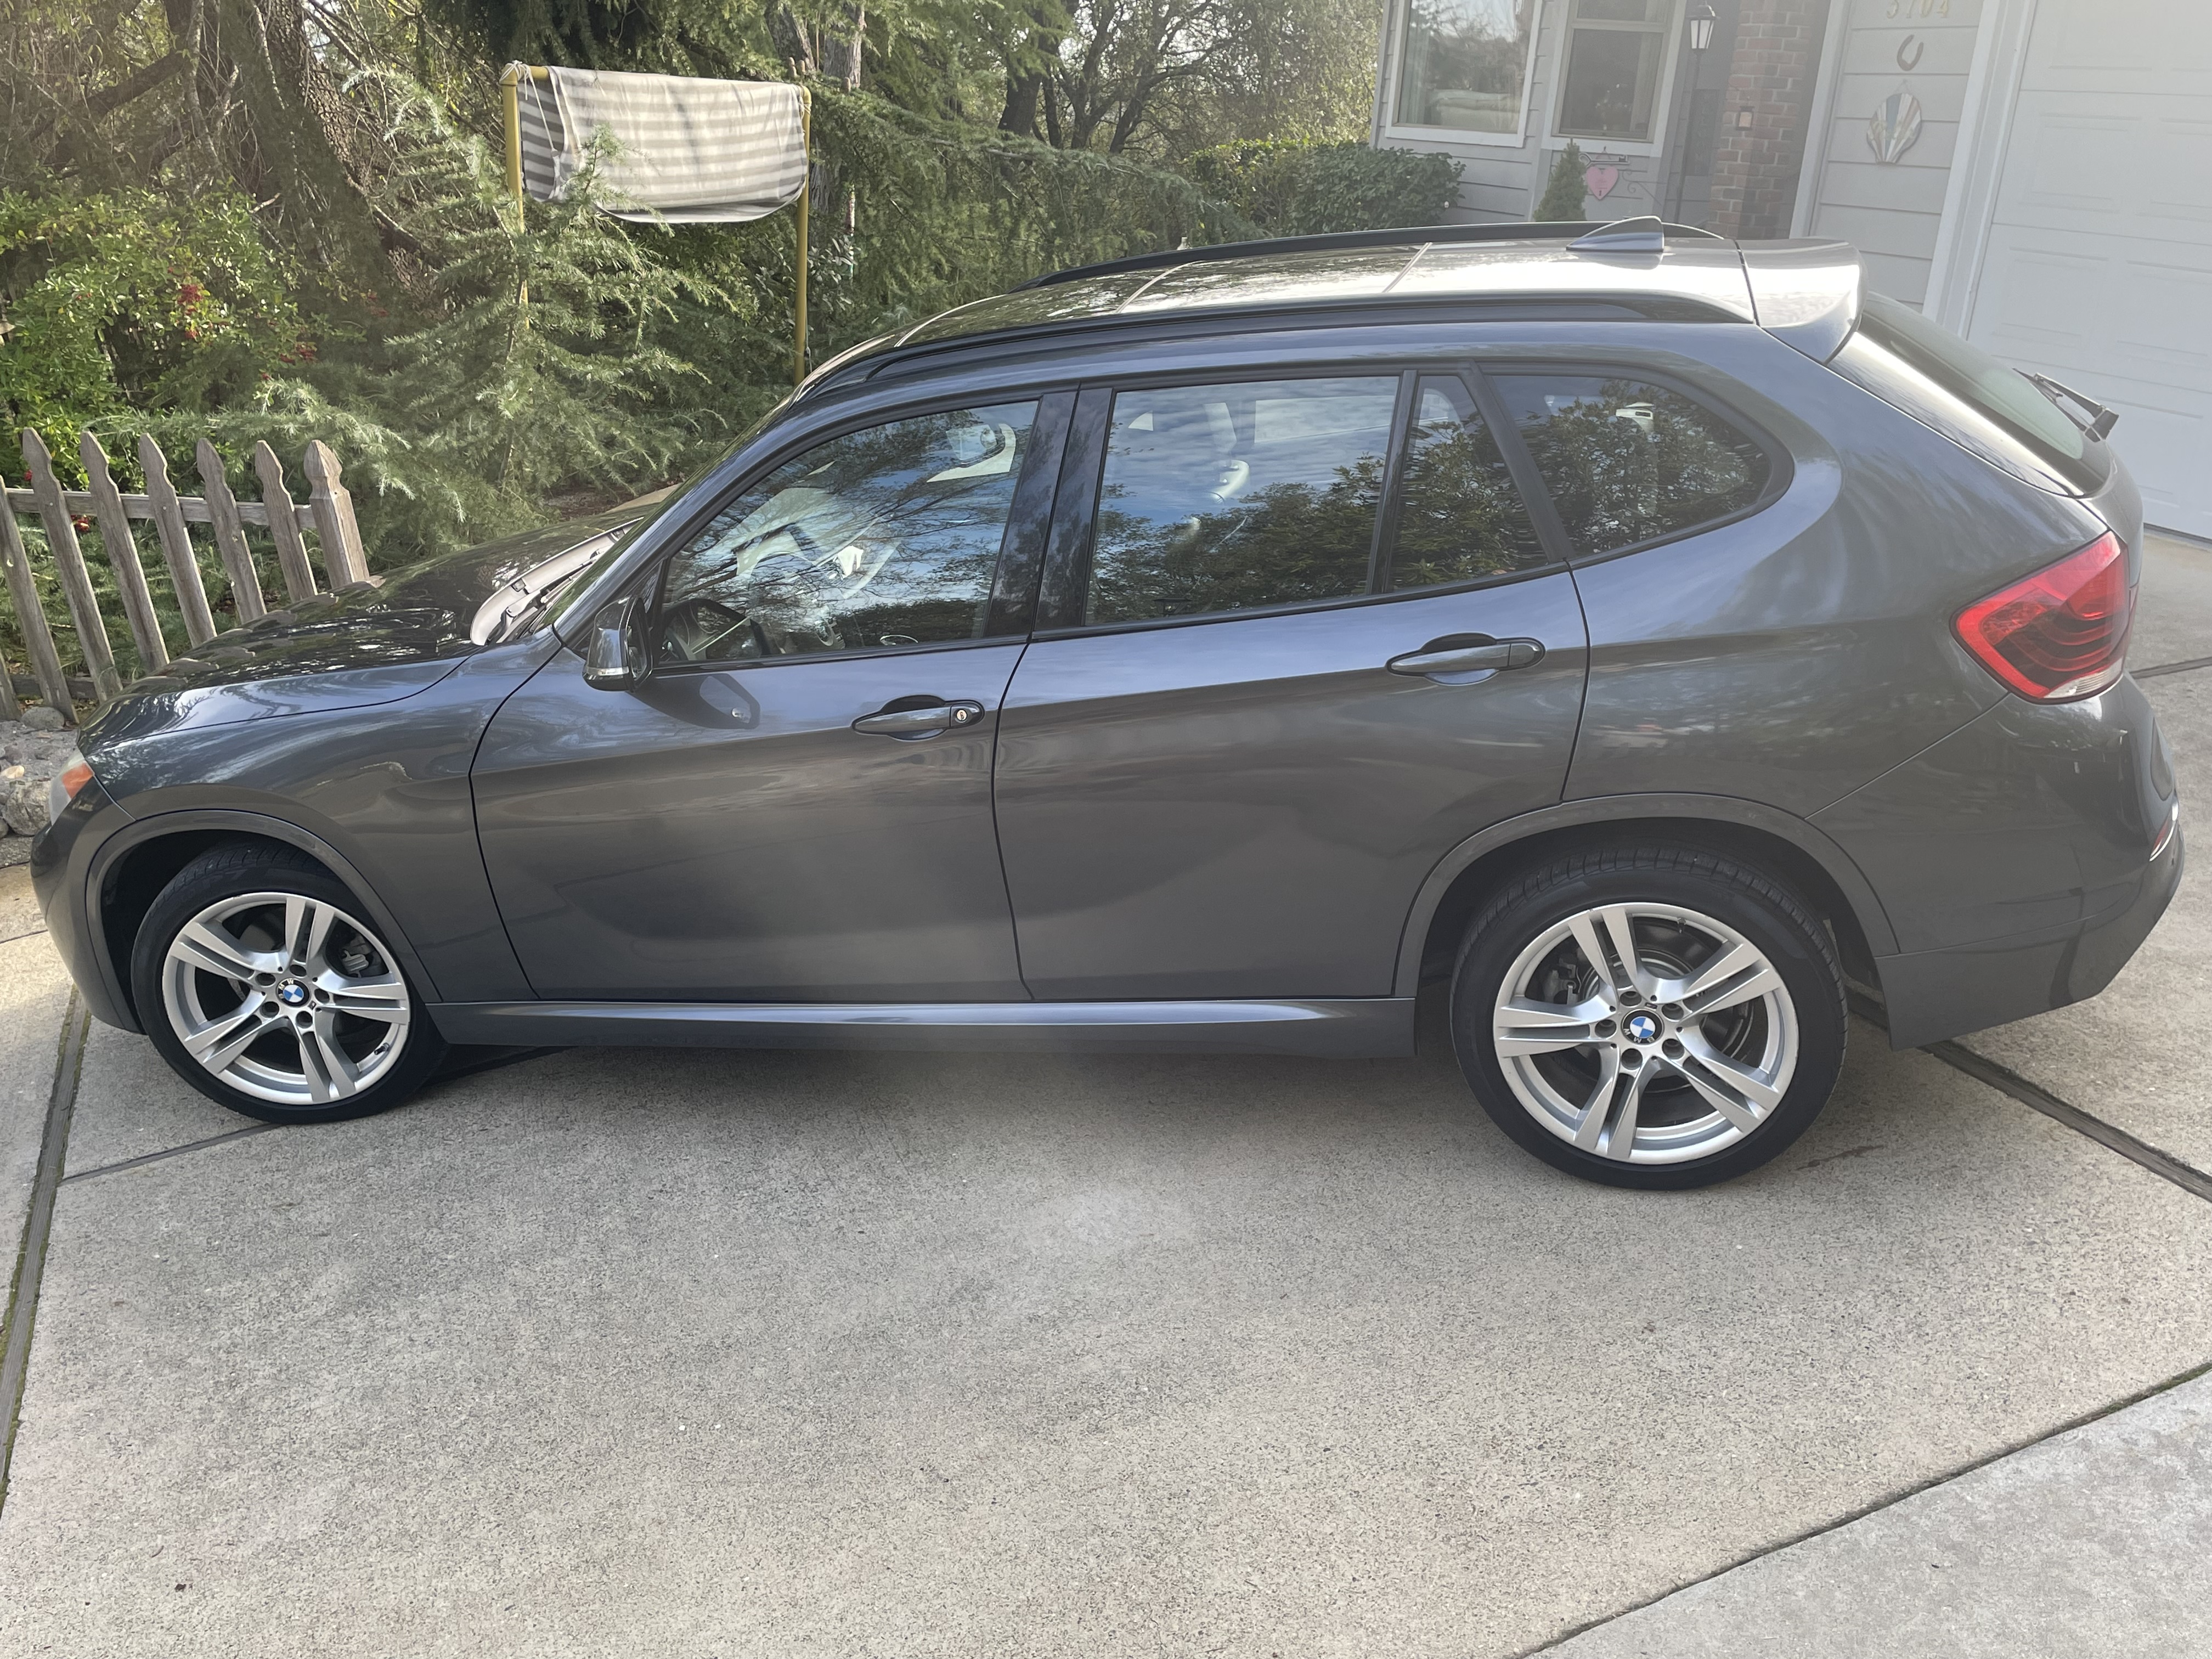 BMW X1 for Sale (Test Drive at Home) - Kelley Blue Book